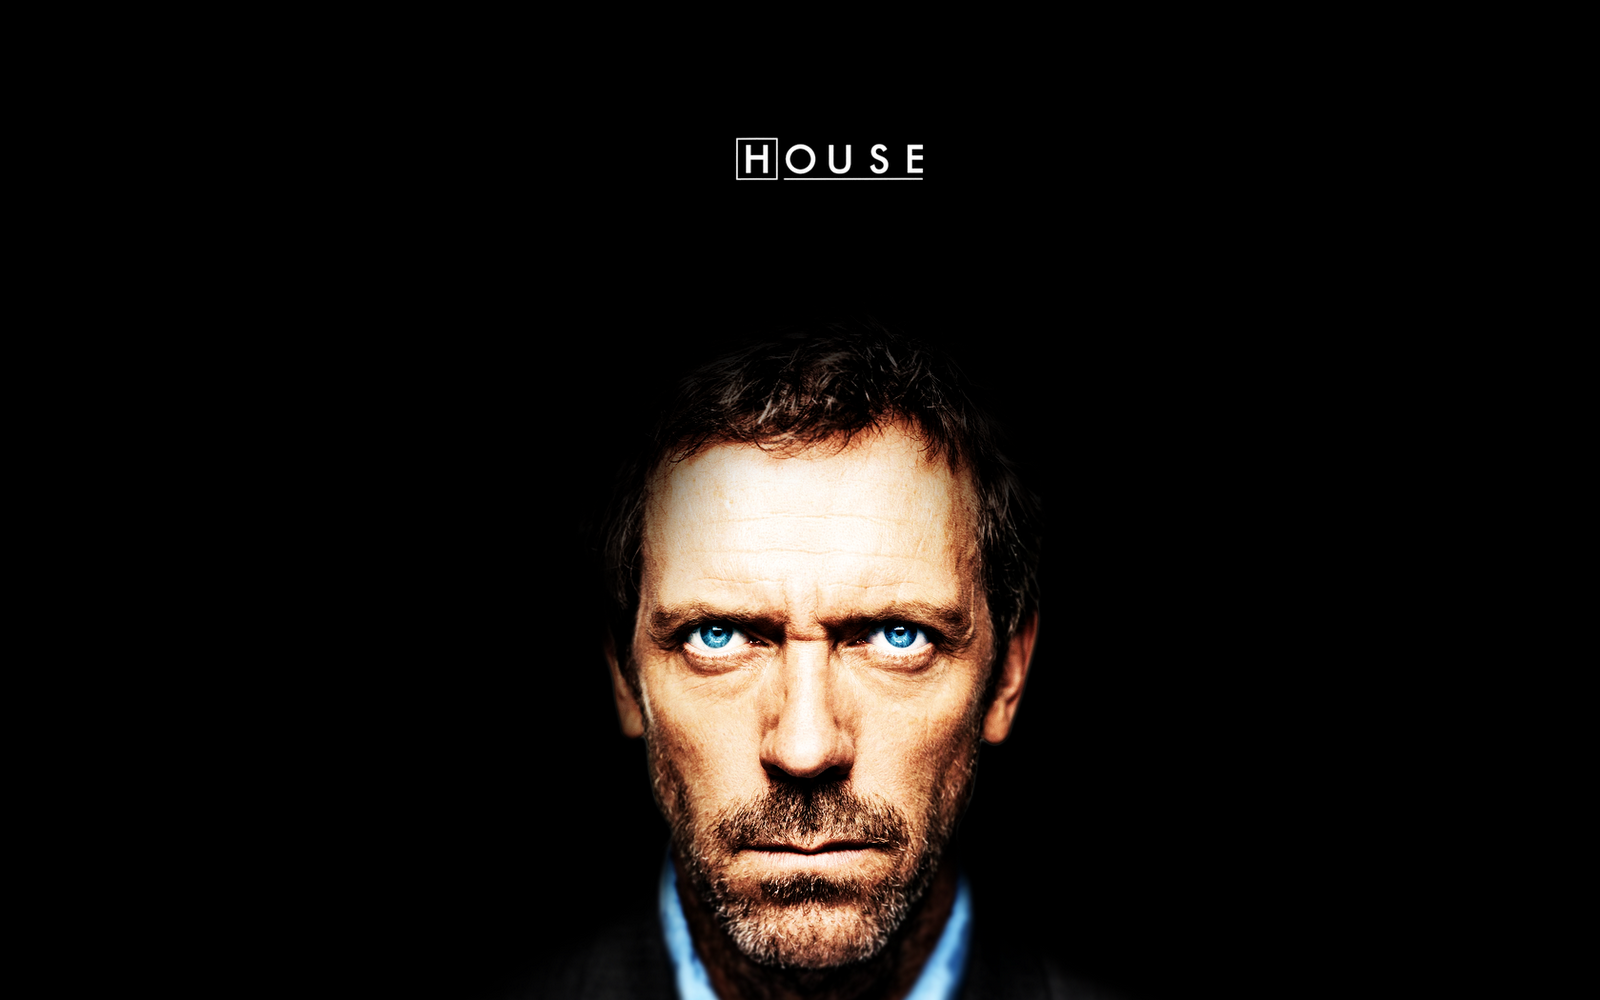 Dr House Hugh Laurie HD Wallpapers Photos Download Free Wallpapers in